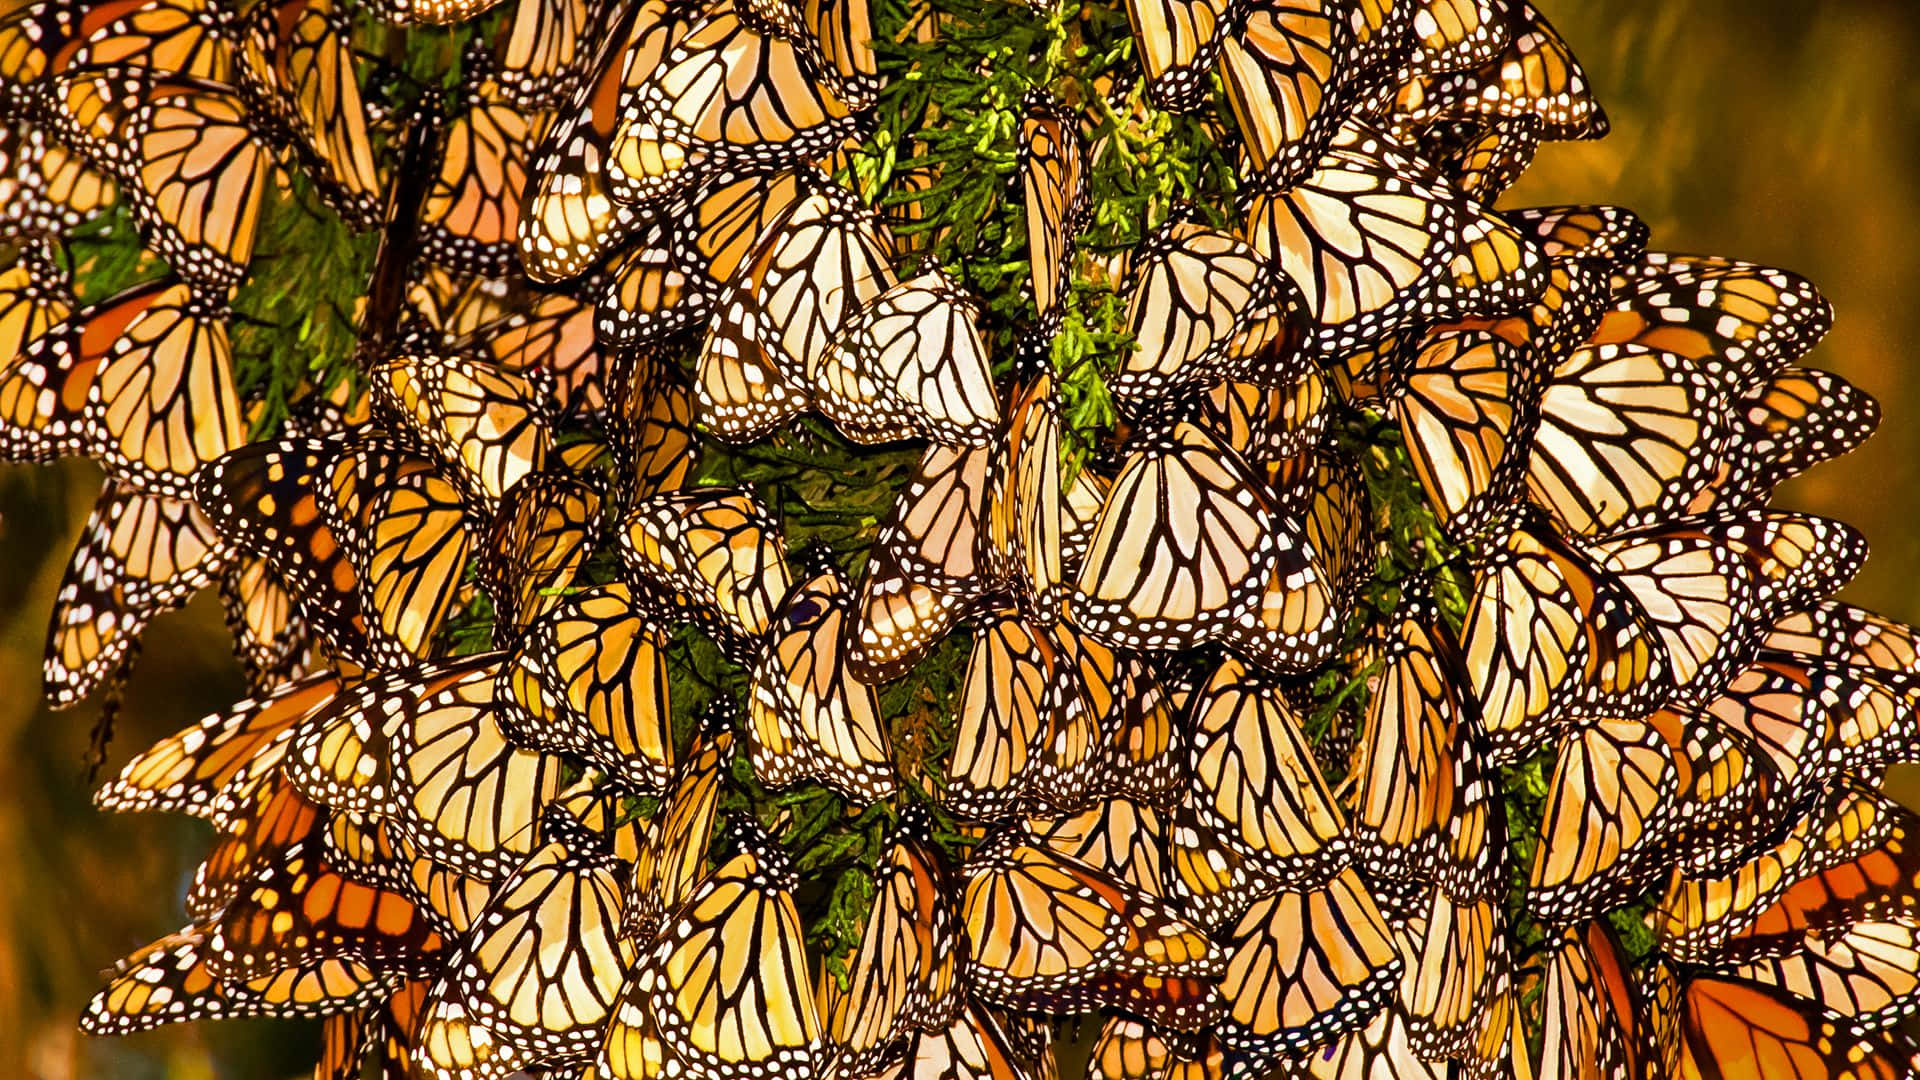 Thousands of monarch butterflies migrating in three clustered waves down the California coast. Wallpaper